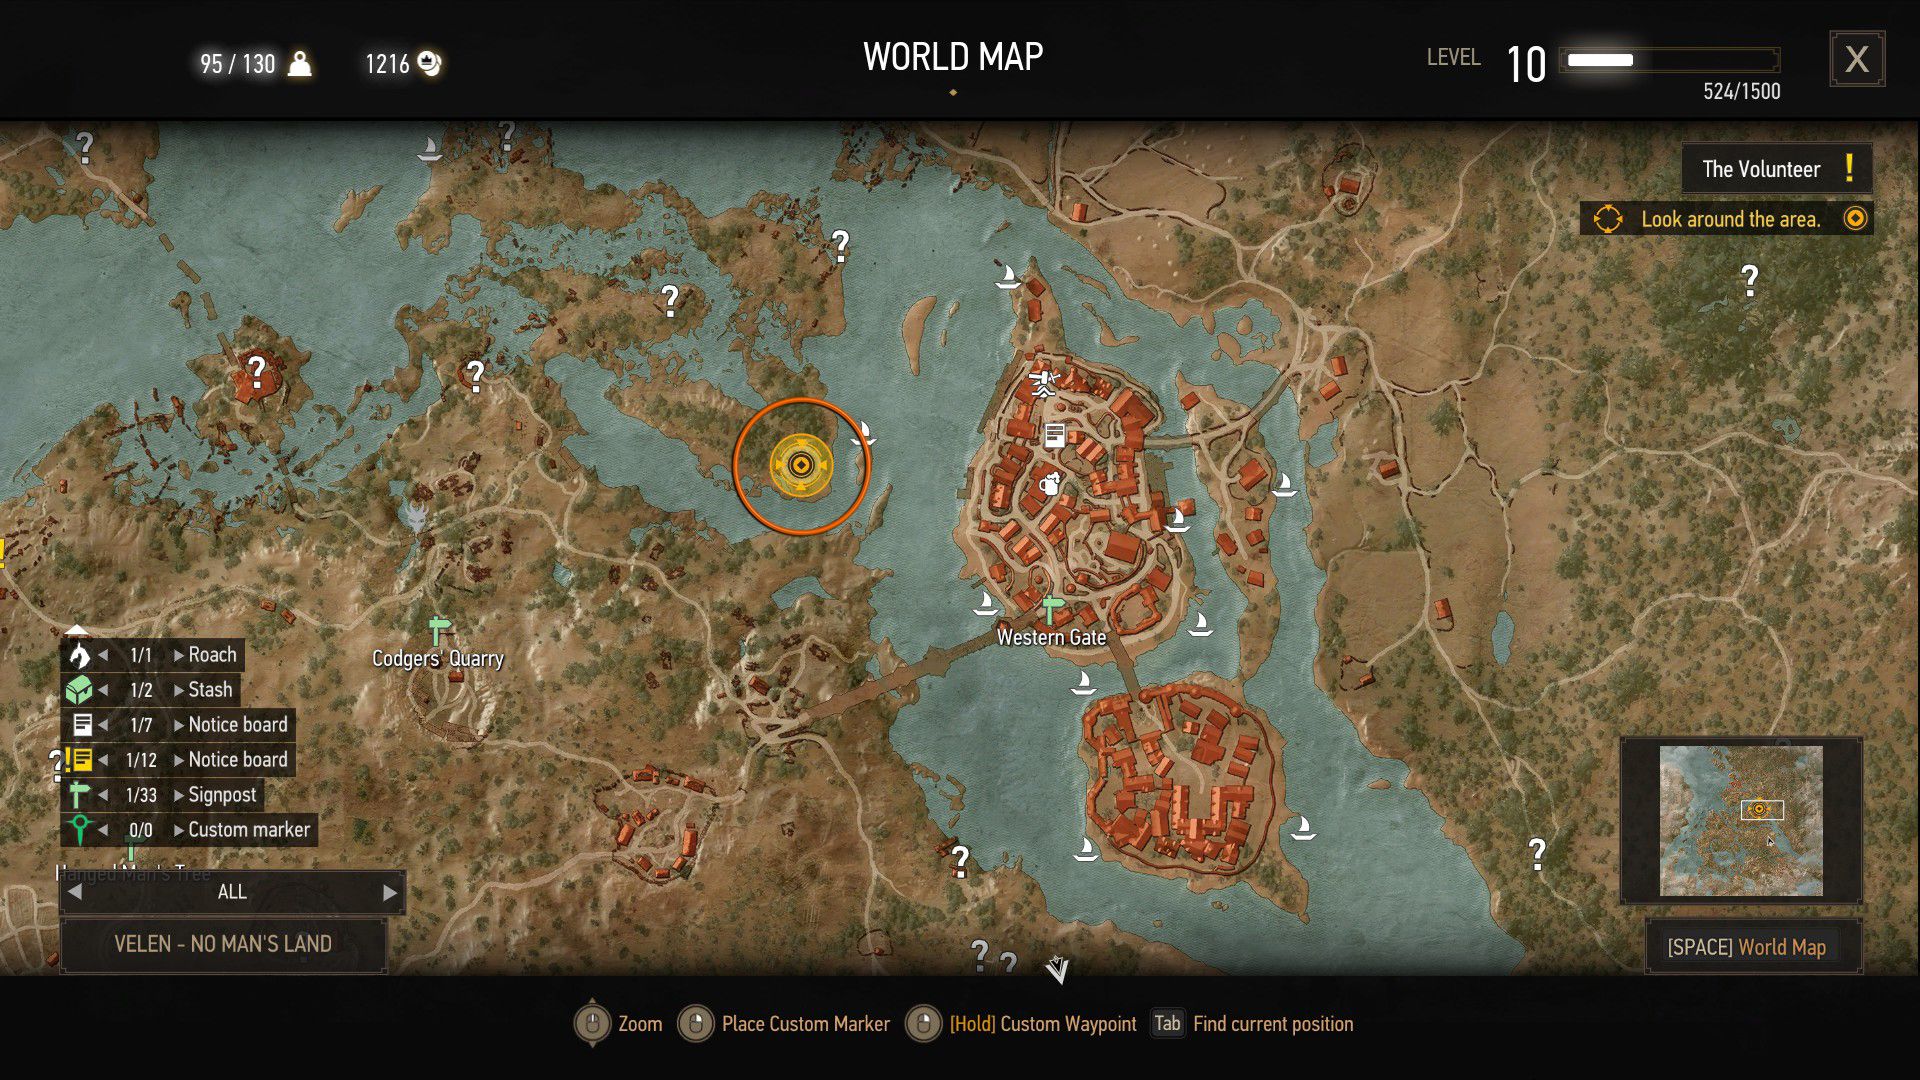 The witcher 3 witcher gear locations фото 13